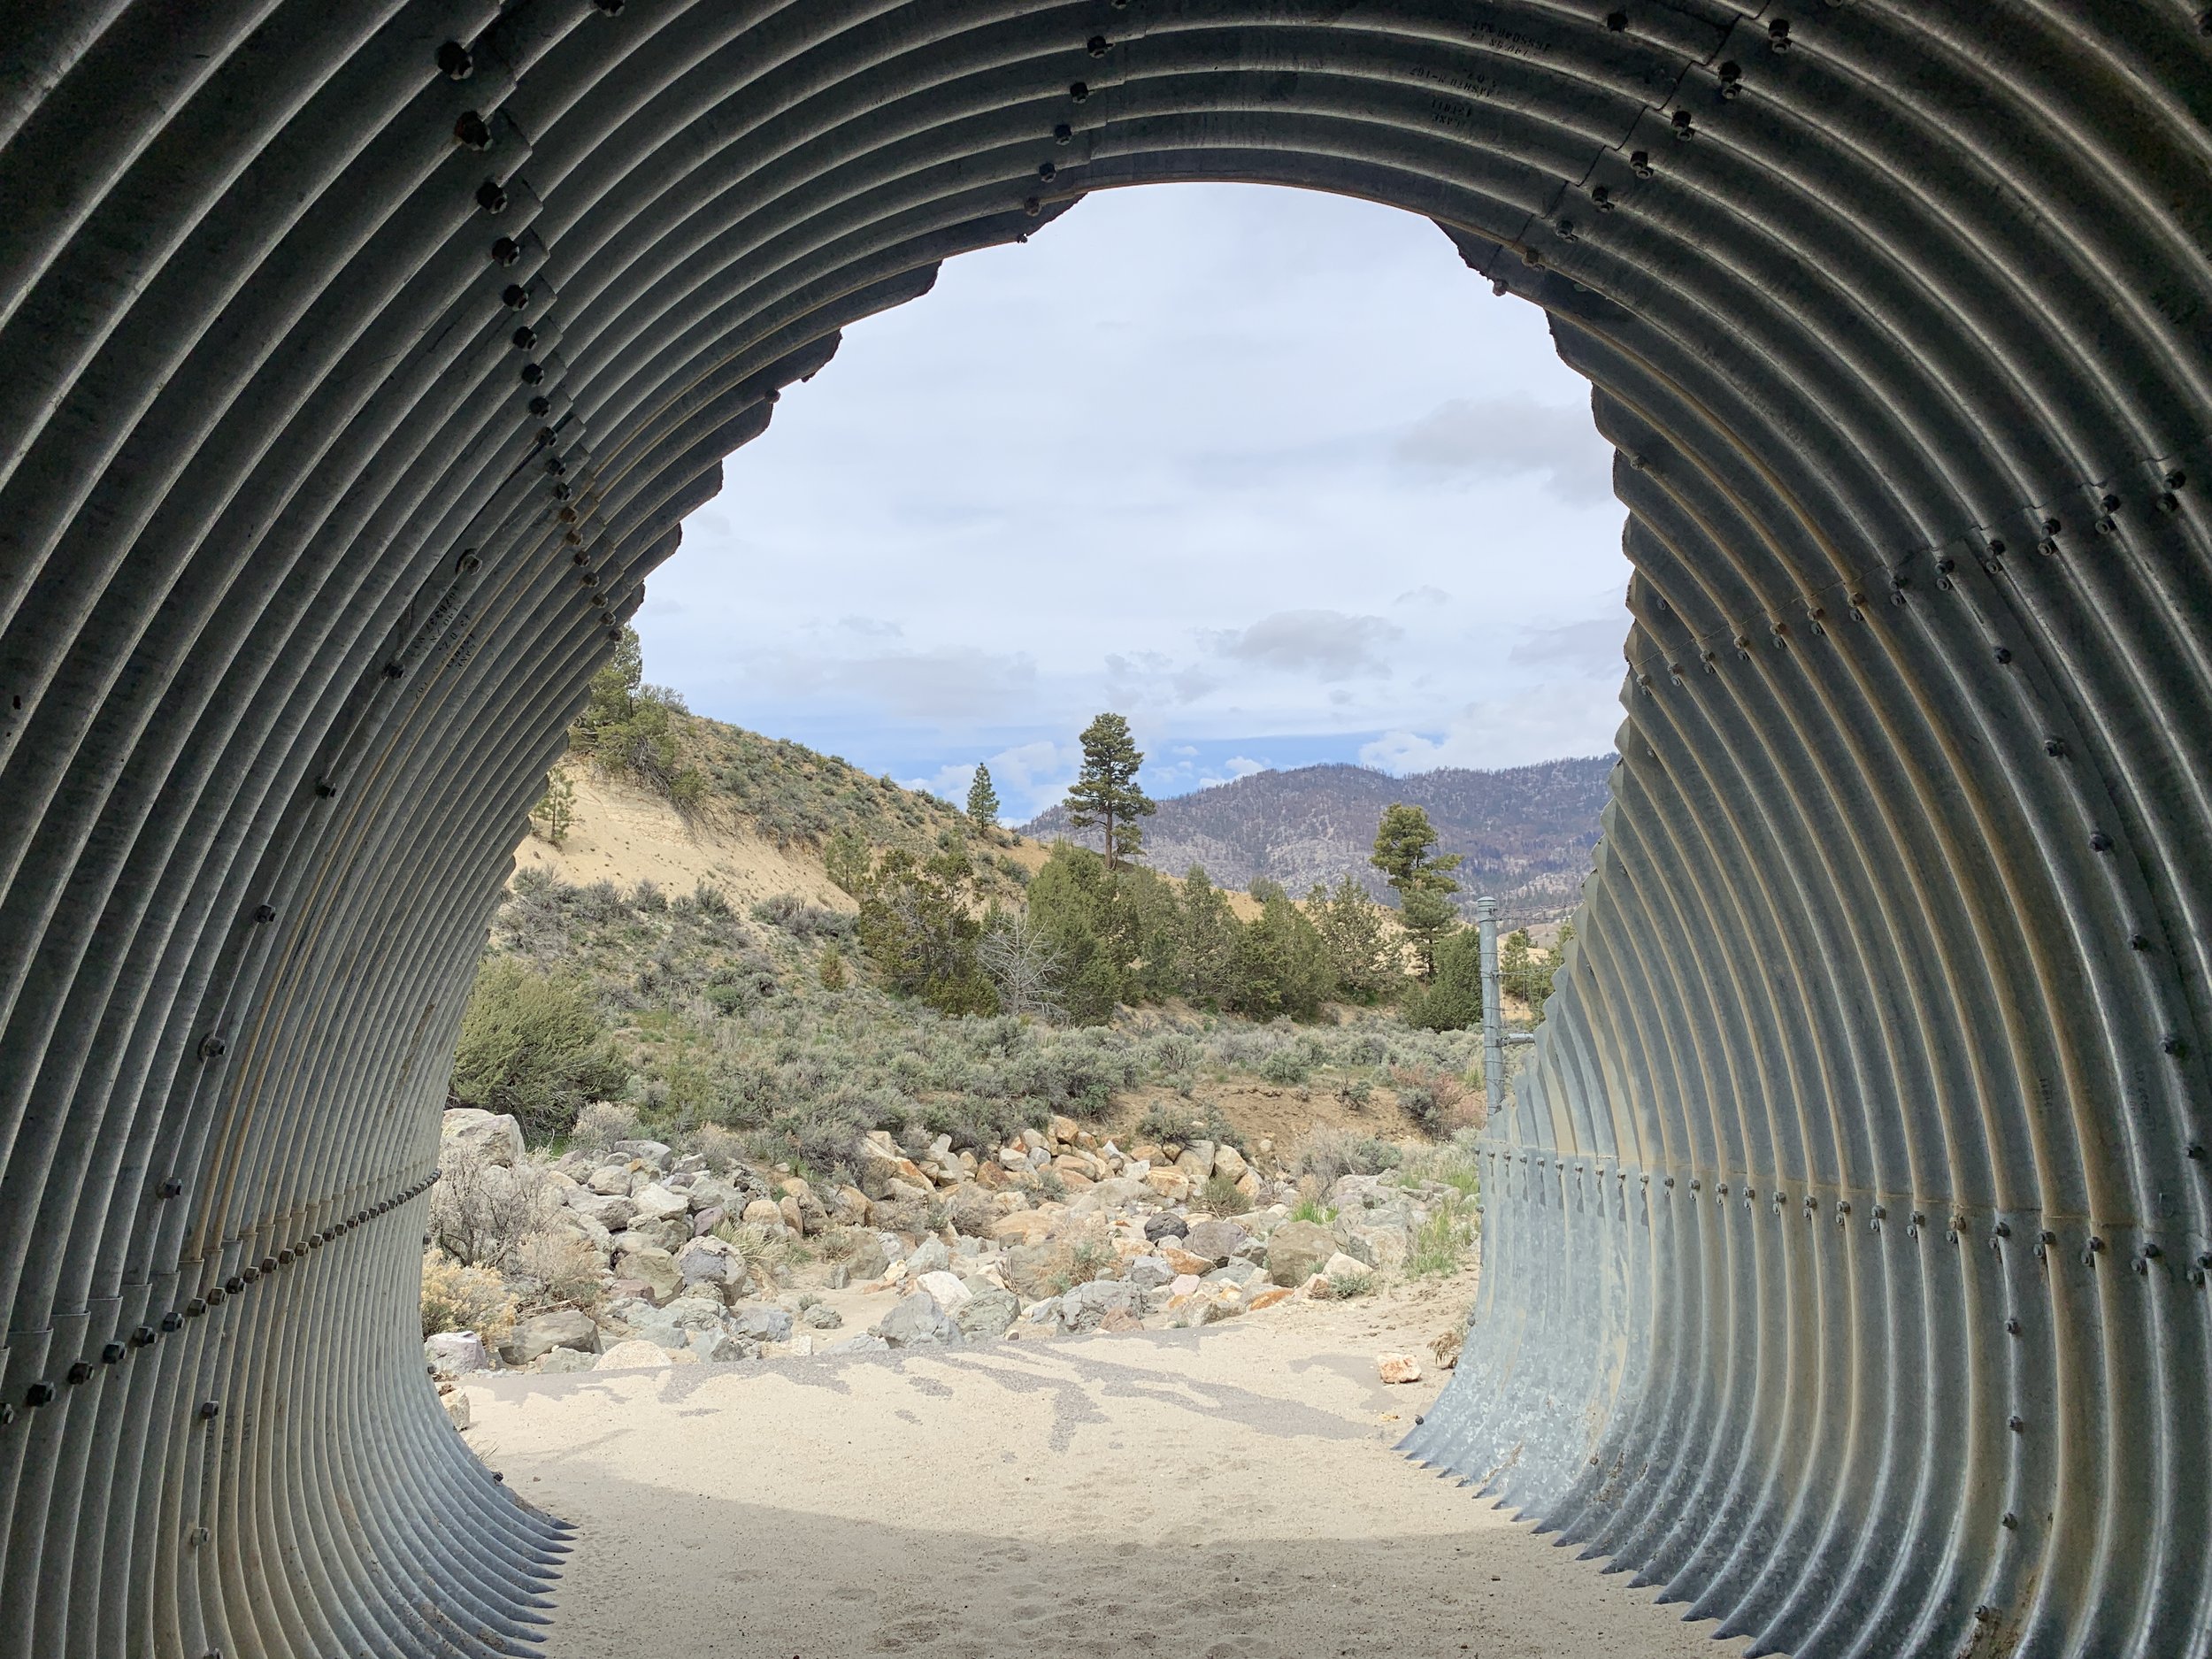  Installing large corrugated culverts, like the structure on Highway 395 pictured here, provide safe passage for multiple species of wildlife, especially when coupled with directional fencing. 